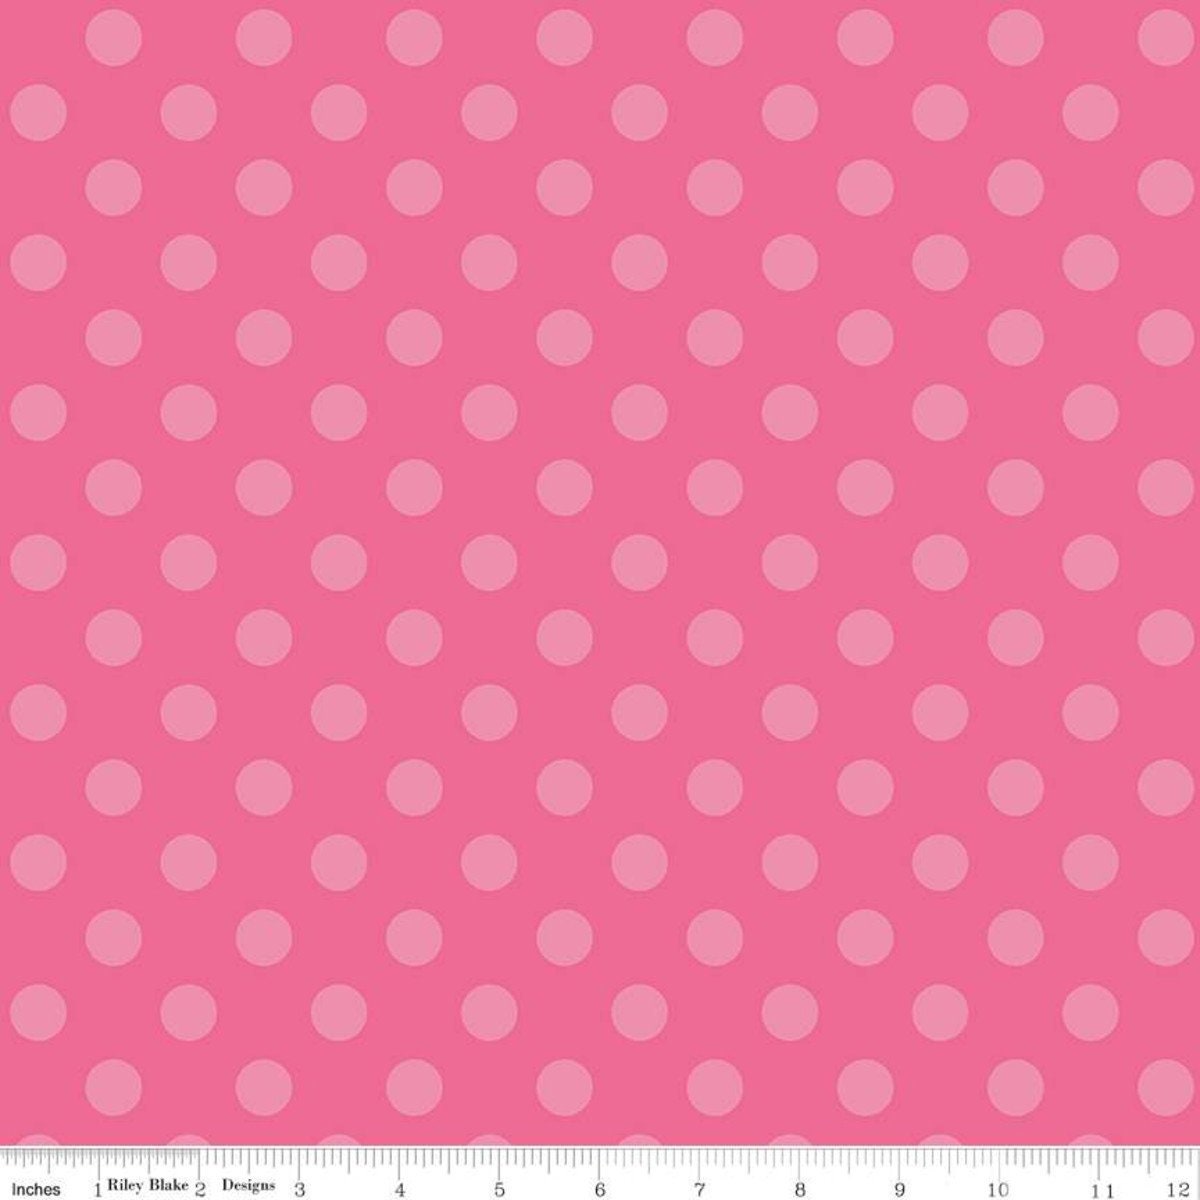 Pink On Fabric, Blender Dots Over Pink Fabric 100% Cotton For Quilting & All Sewing Projects